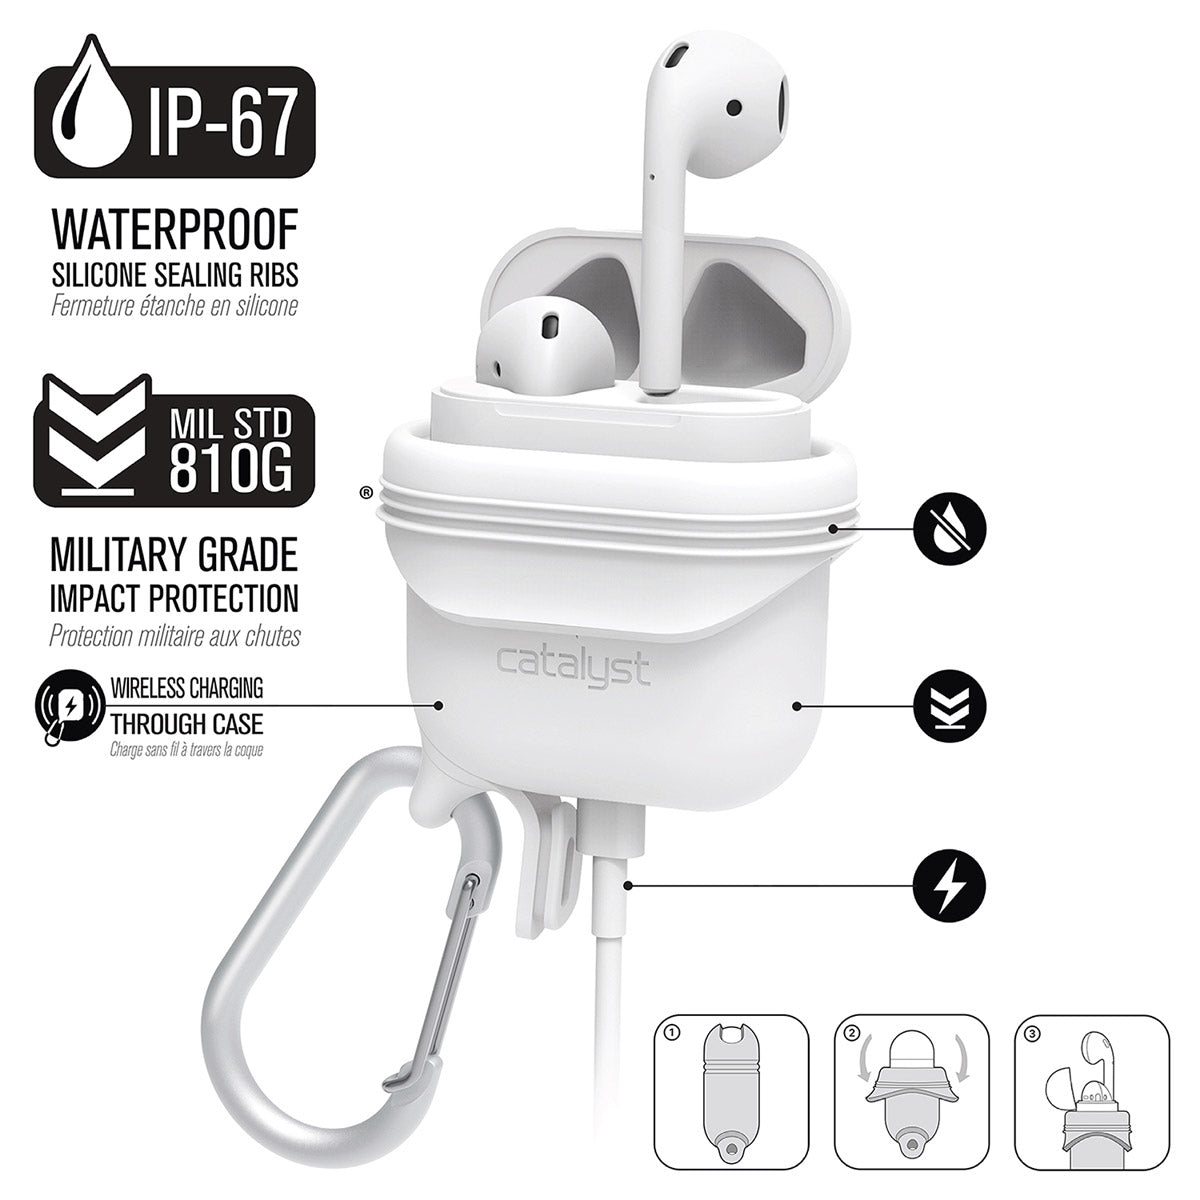 Catalyst Waterproof Case for AirPods (3rd generation) - Special